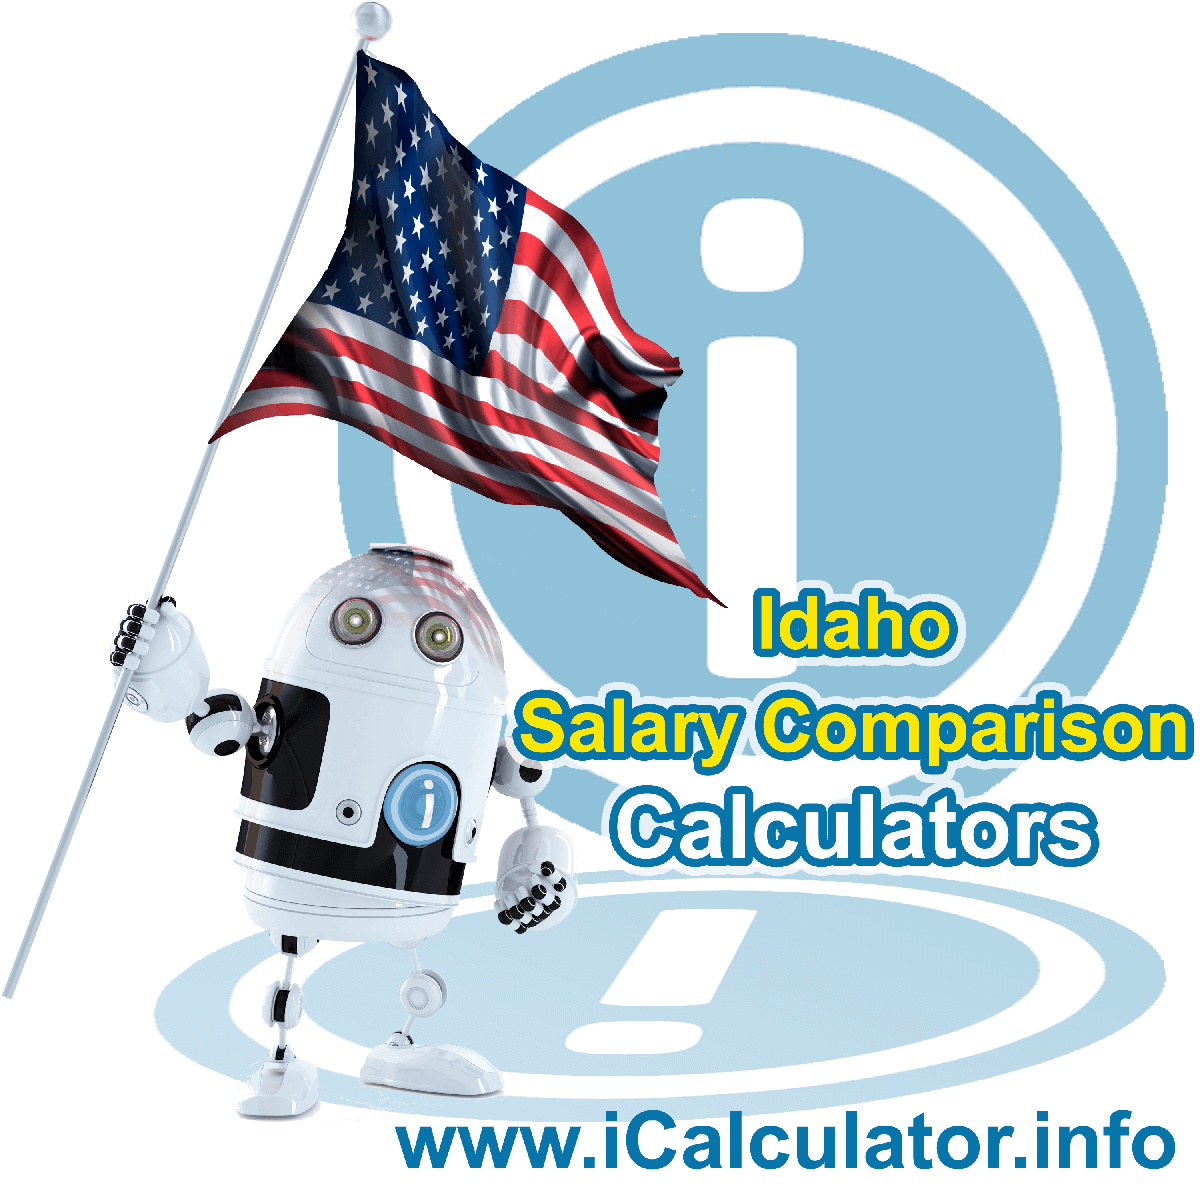 Idaho Salary Comparison Calculator 2023 | iCalculator™ | The Idaho Salary Comparison Calculator allows you to quickly calculate and compare upto 6 salaries in Idaho or compare with other states for the 2023 tax year and historical tax years. 